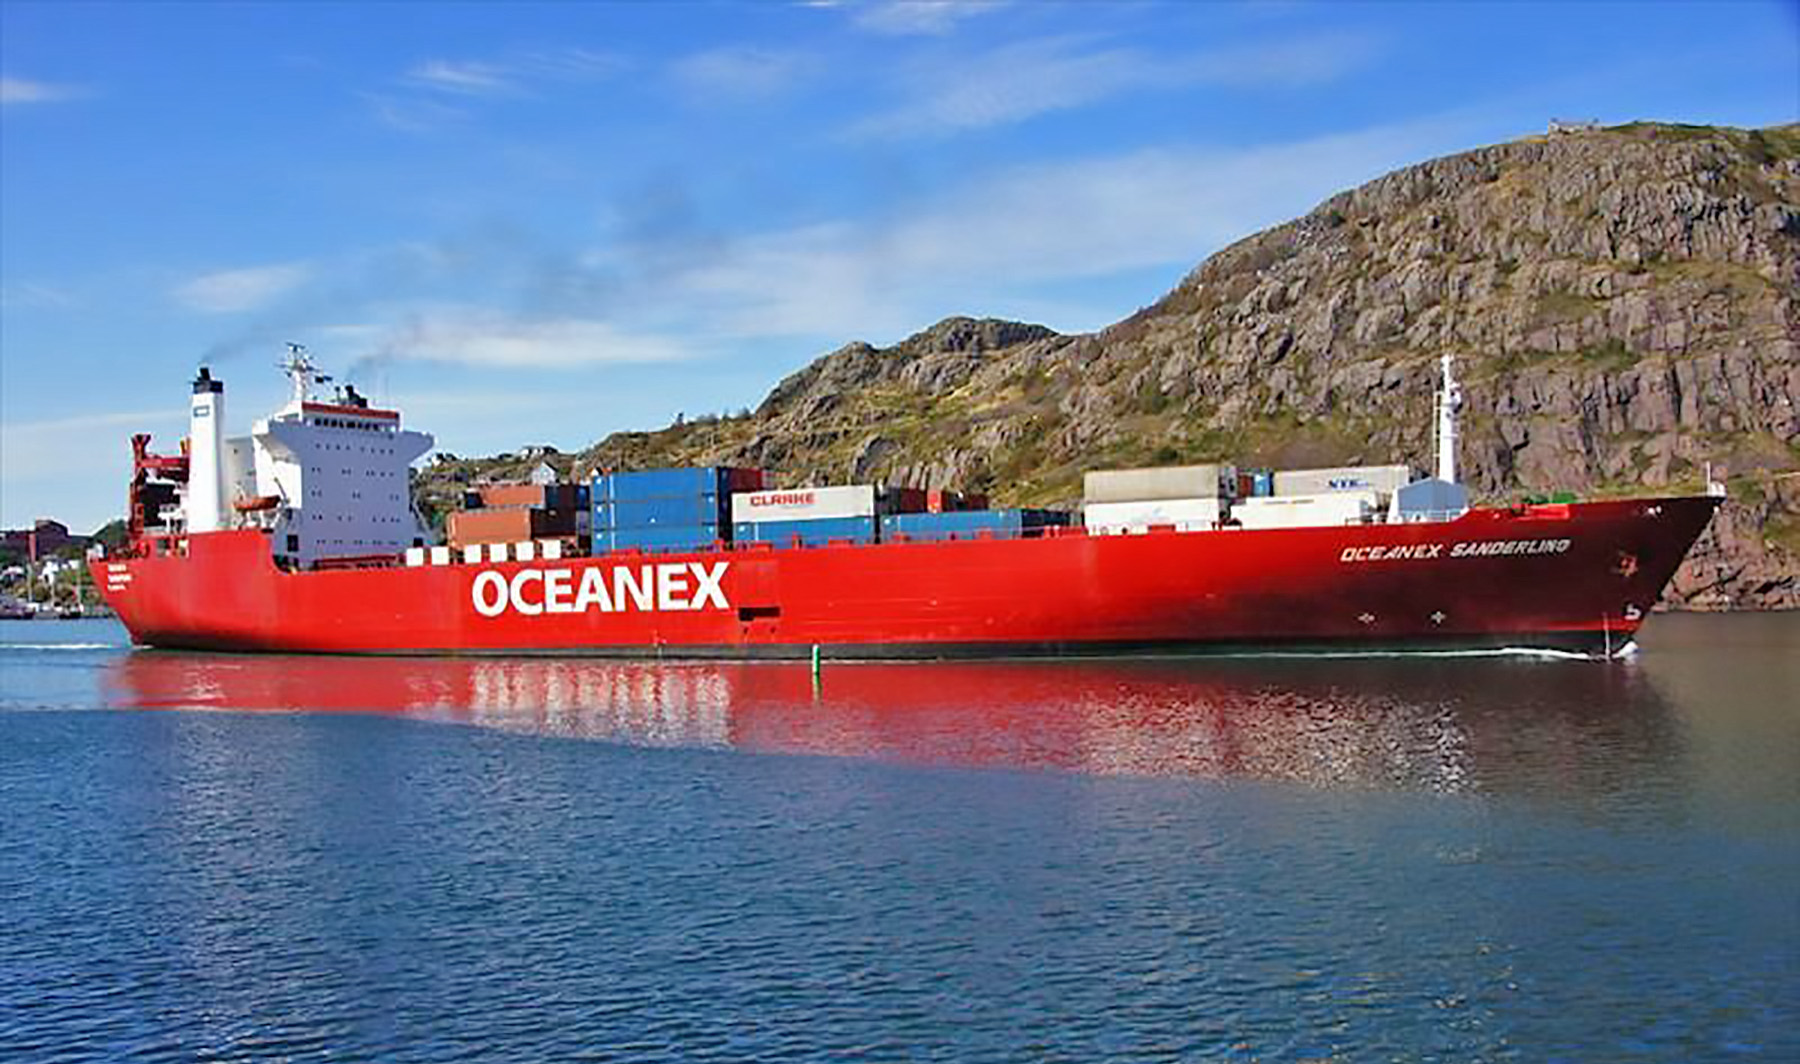 Oceanex Sanderling ice-strengthened dry cargo vessel with Ecospeed on the hull